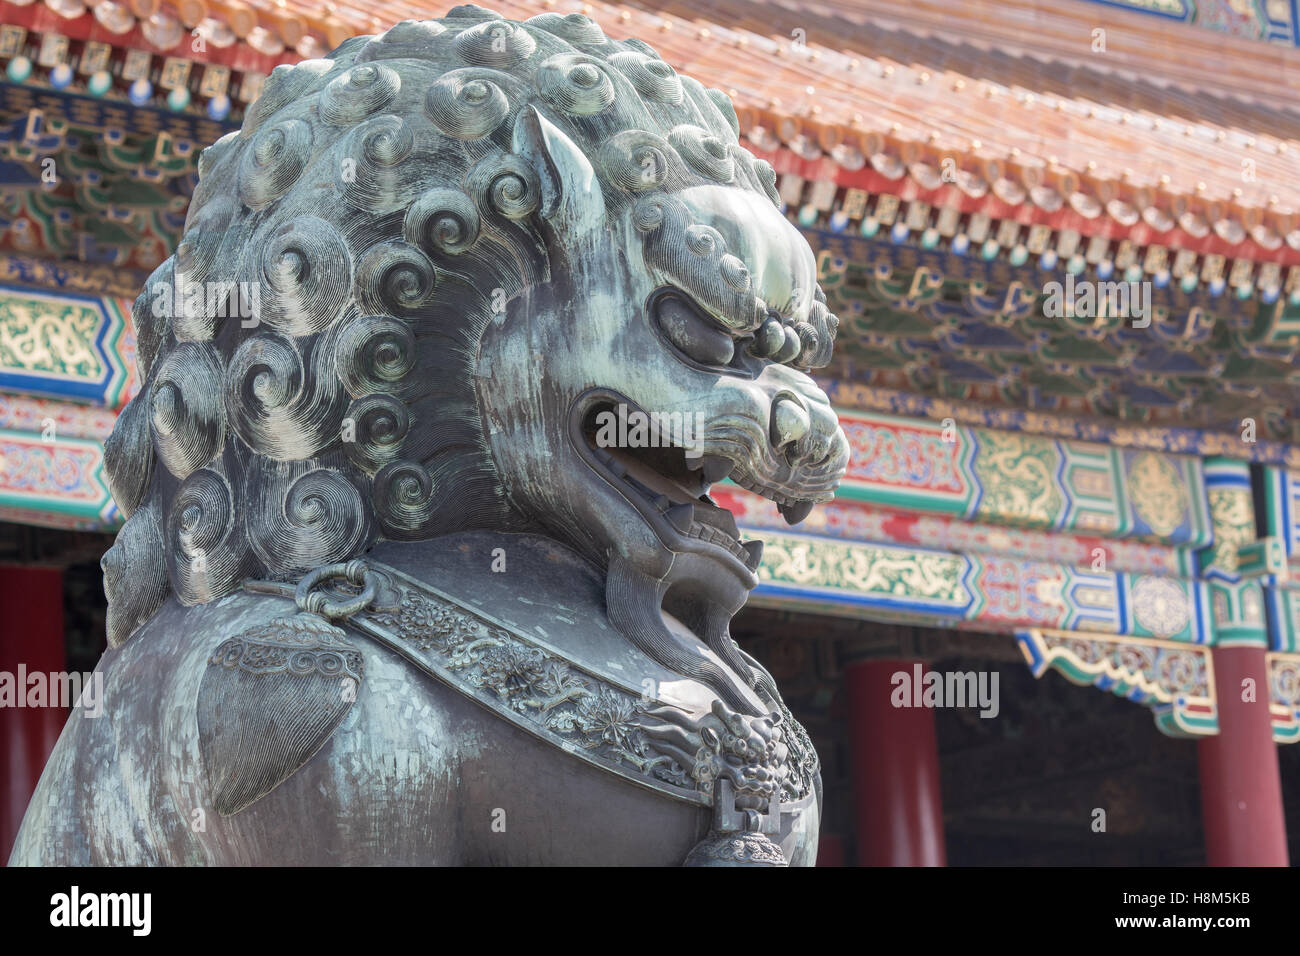 Beijing China - Detail of a bronze guardian lion statue (Shi) with the ornamented architecture of the Palace Museum in the backg Stock Photo